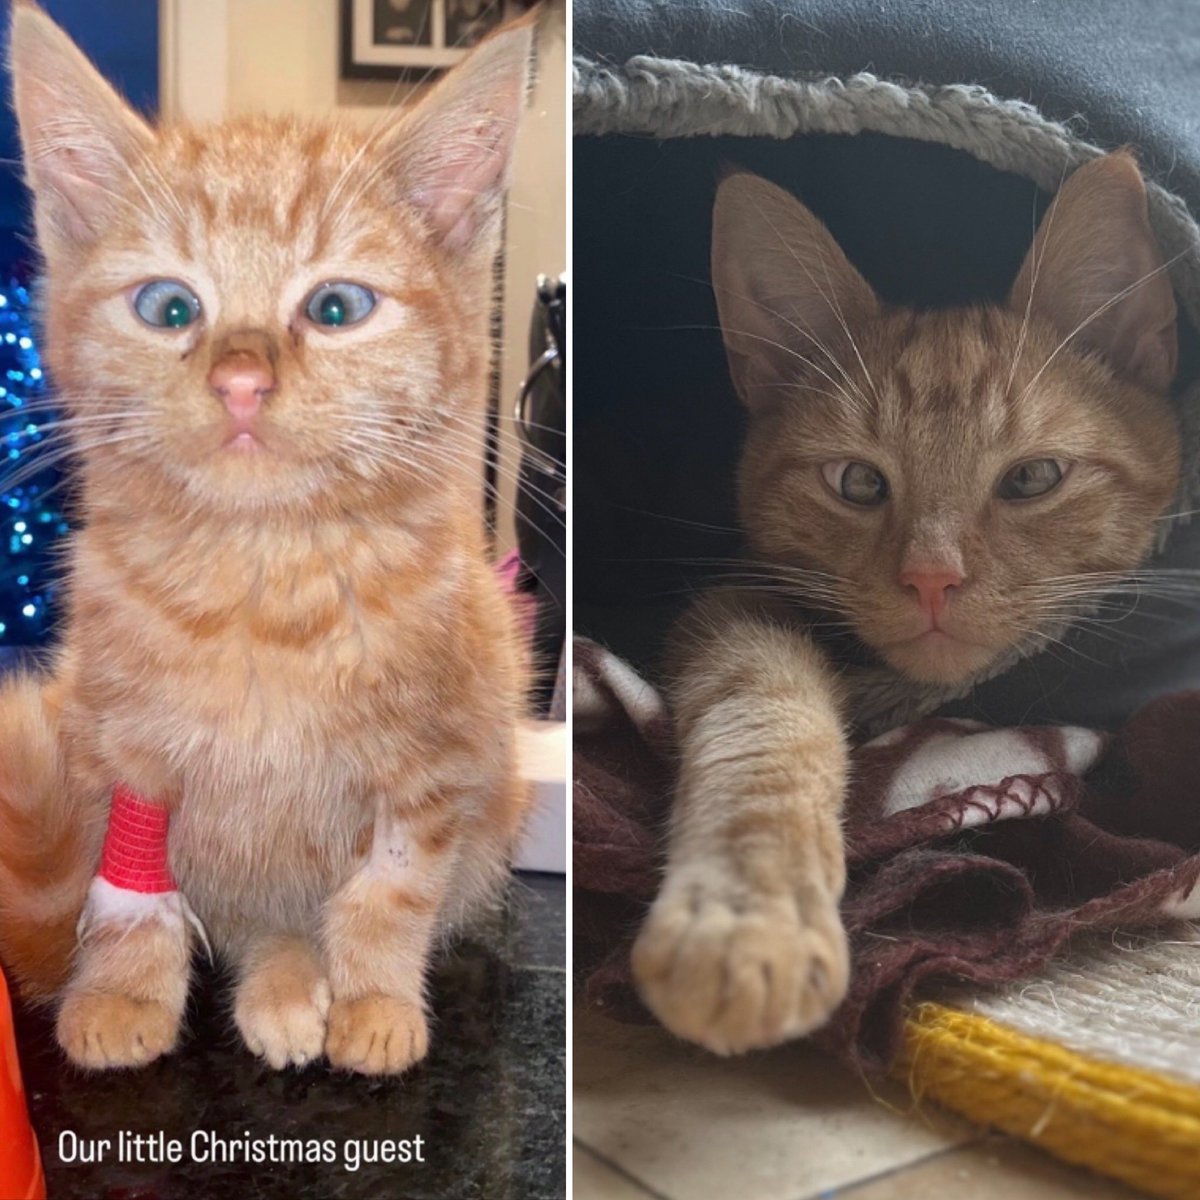 An email from @DublinSPCA today reminded me that we fostered this guy almost a year ago ! Shelters need support over Christmas & DSPCA made it so easy - crate, food, meds supplied. A little cat / dog hair among all the mess of Xmas - u will hardly notice & it is a big help !